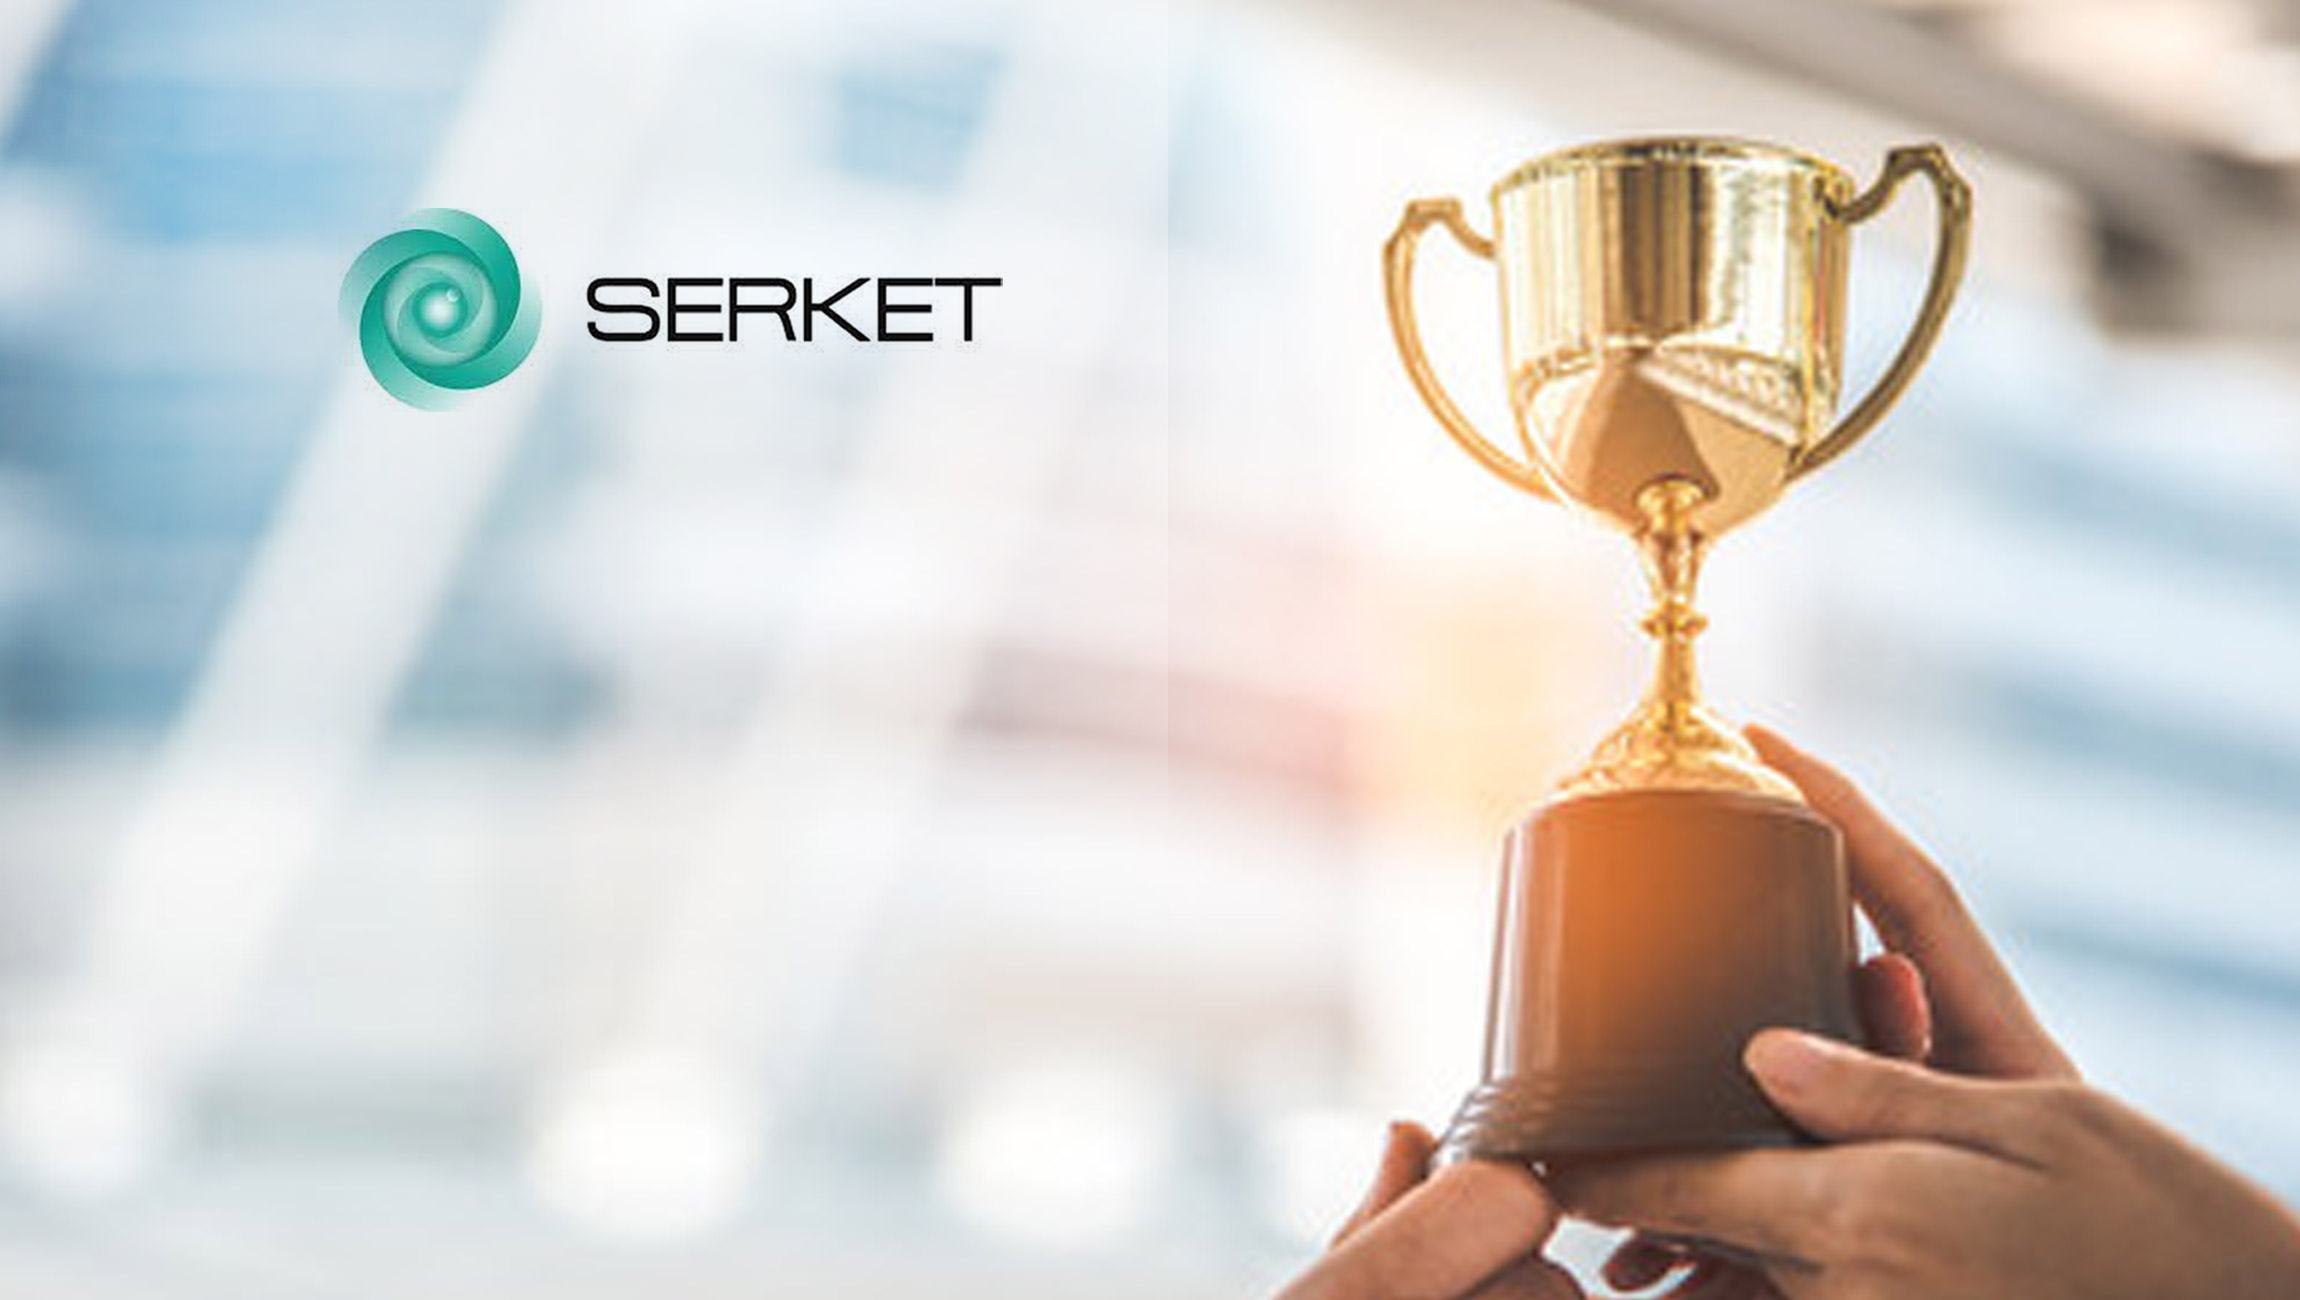 Serket and Powerful Medical Win the 2021 UiPath Automation Awards with Automation for Good Solutions